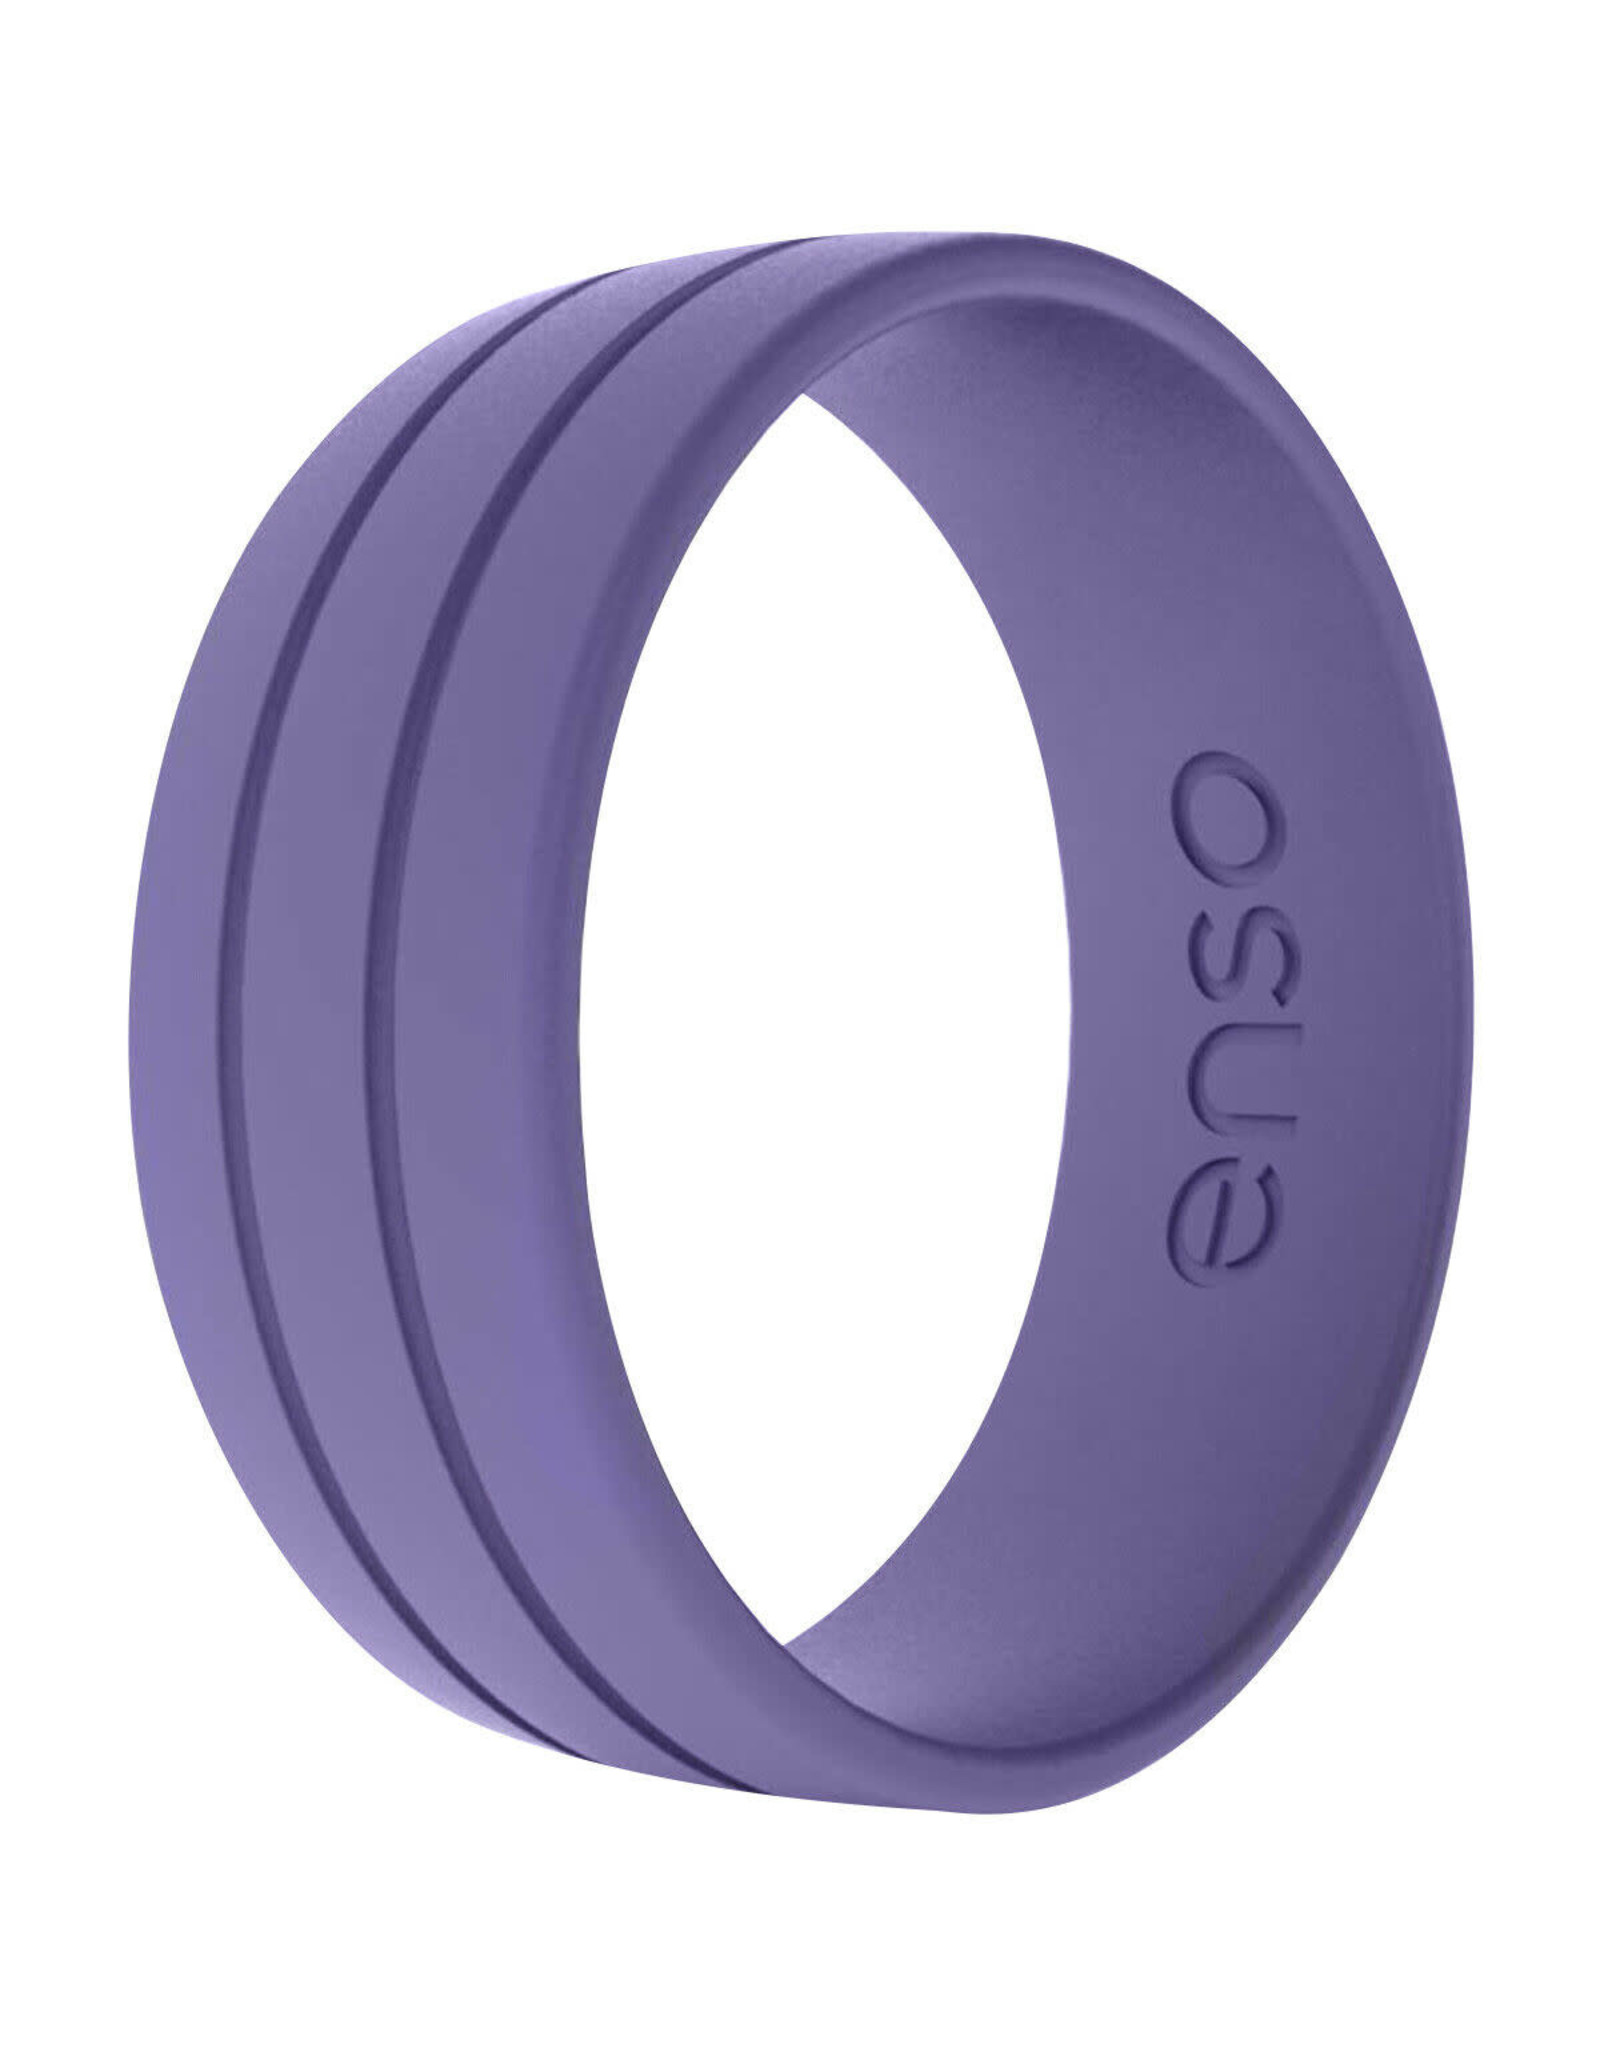 Enso Rings Enso Rings Women's Ultralite Silicone Ring Ultraviolet